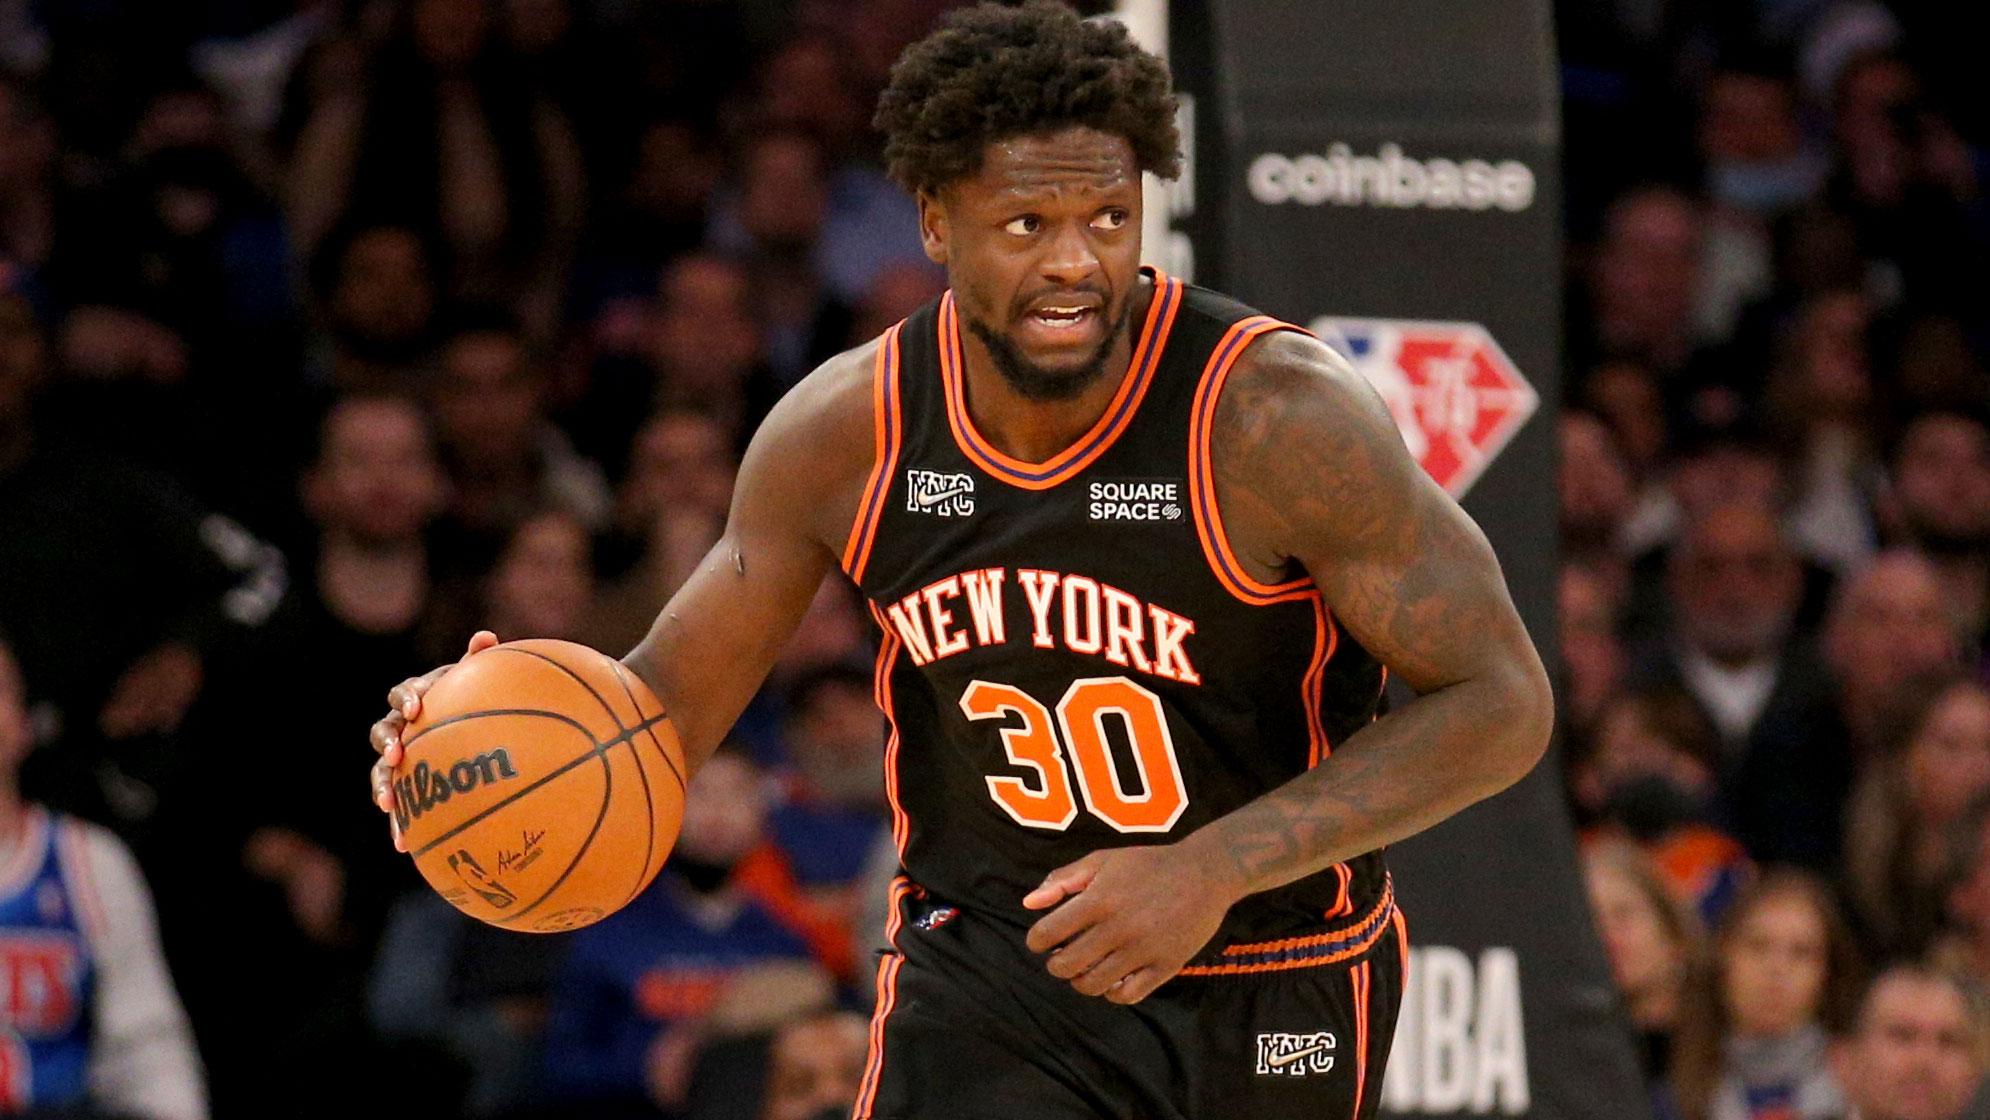 Feb 16, 2022; New York, New York, USA; New York Knicks forward Julius Randle (30) brings the ball up court against the Brooklyn Nets during the fourth quarter at Madison Square Garden. / Brad Penner-USA TODAY Sports